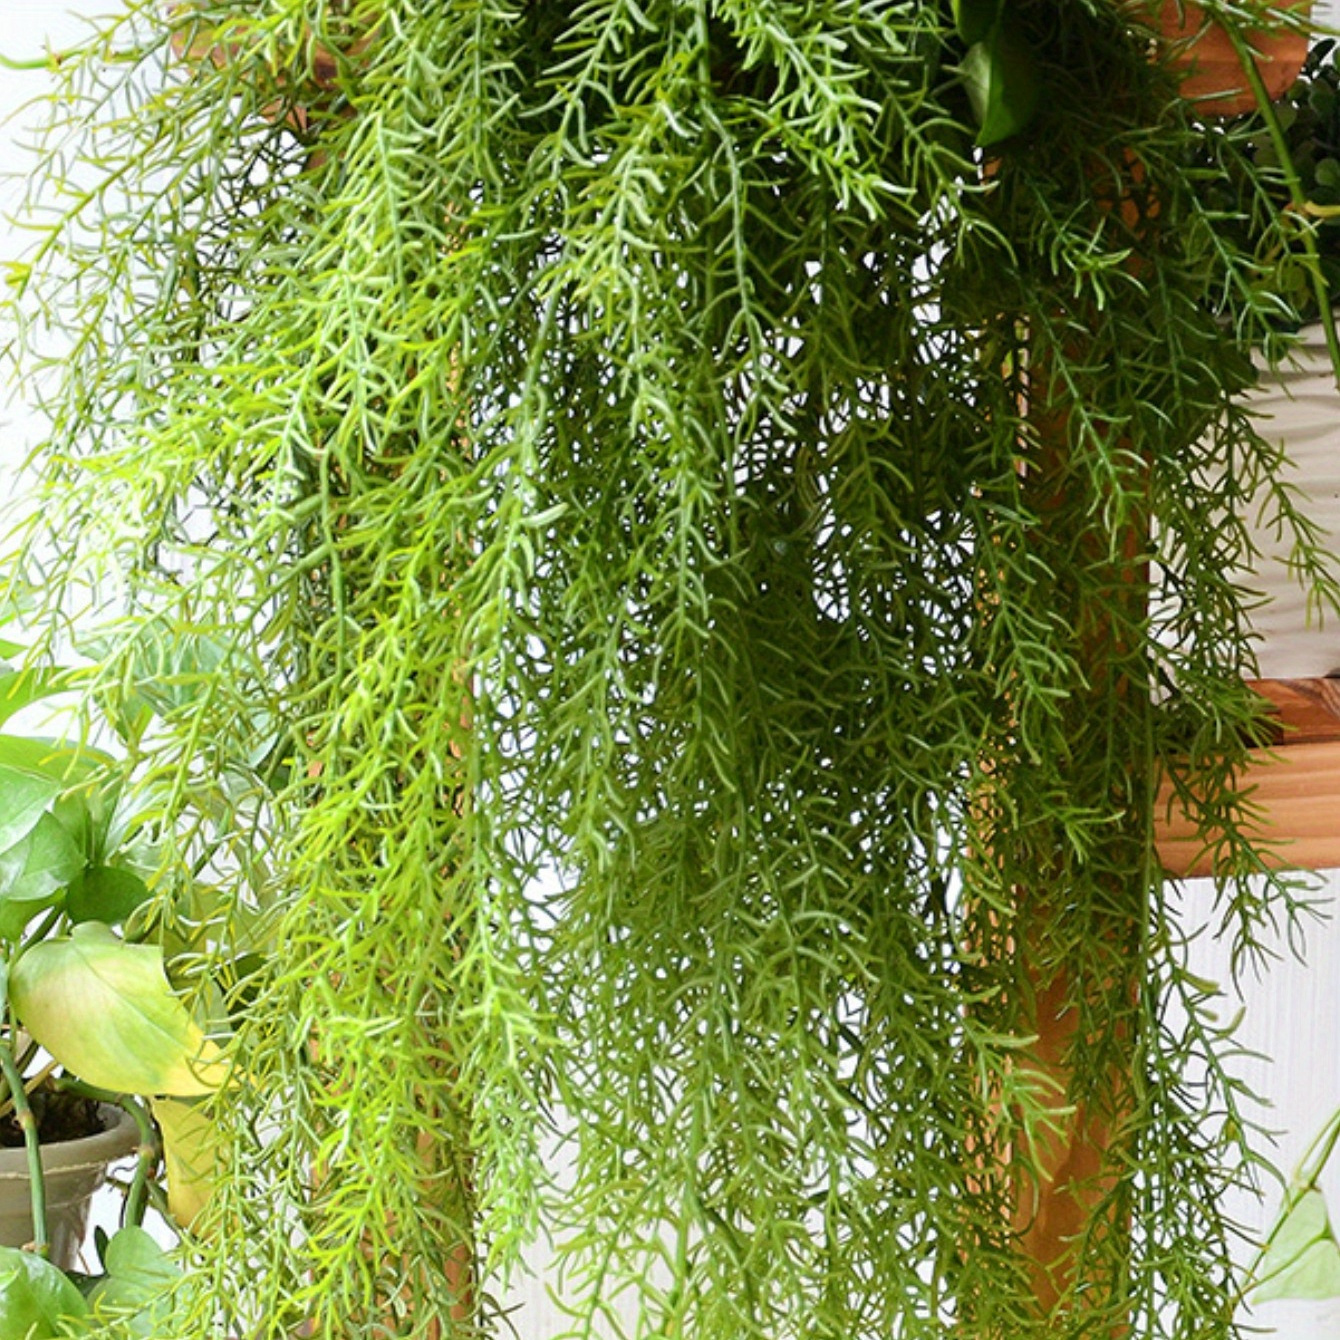 

2pcs Artificial Greenery Ferns Hanging Vines Fake Hanging Vine Pine Needle Hanging Plastic Plant For Indoor Outdoor Decor